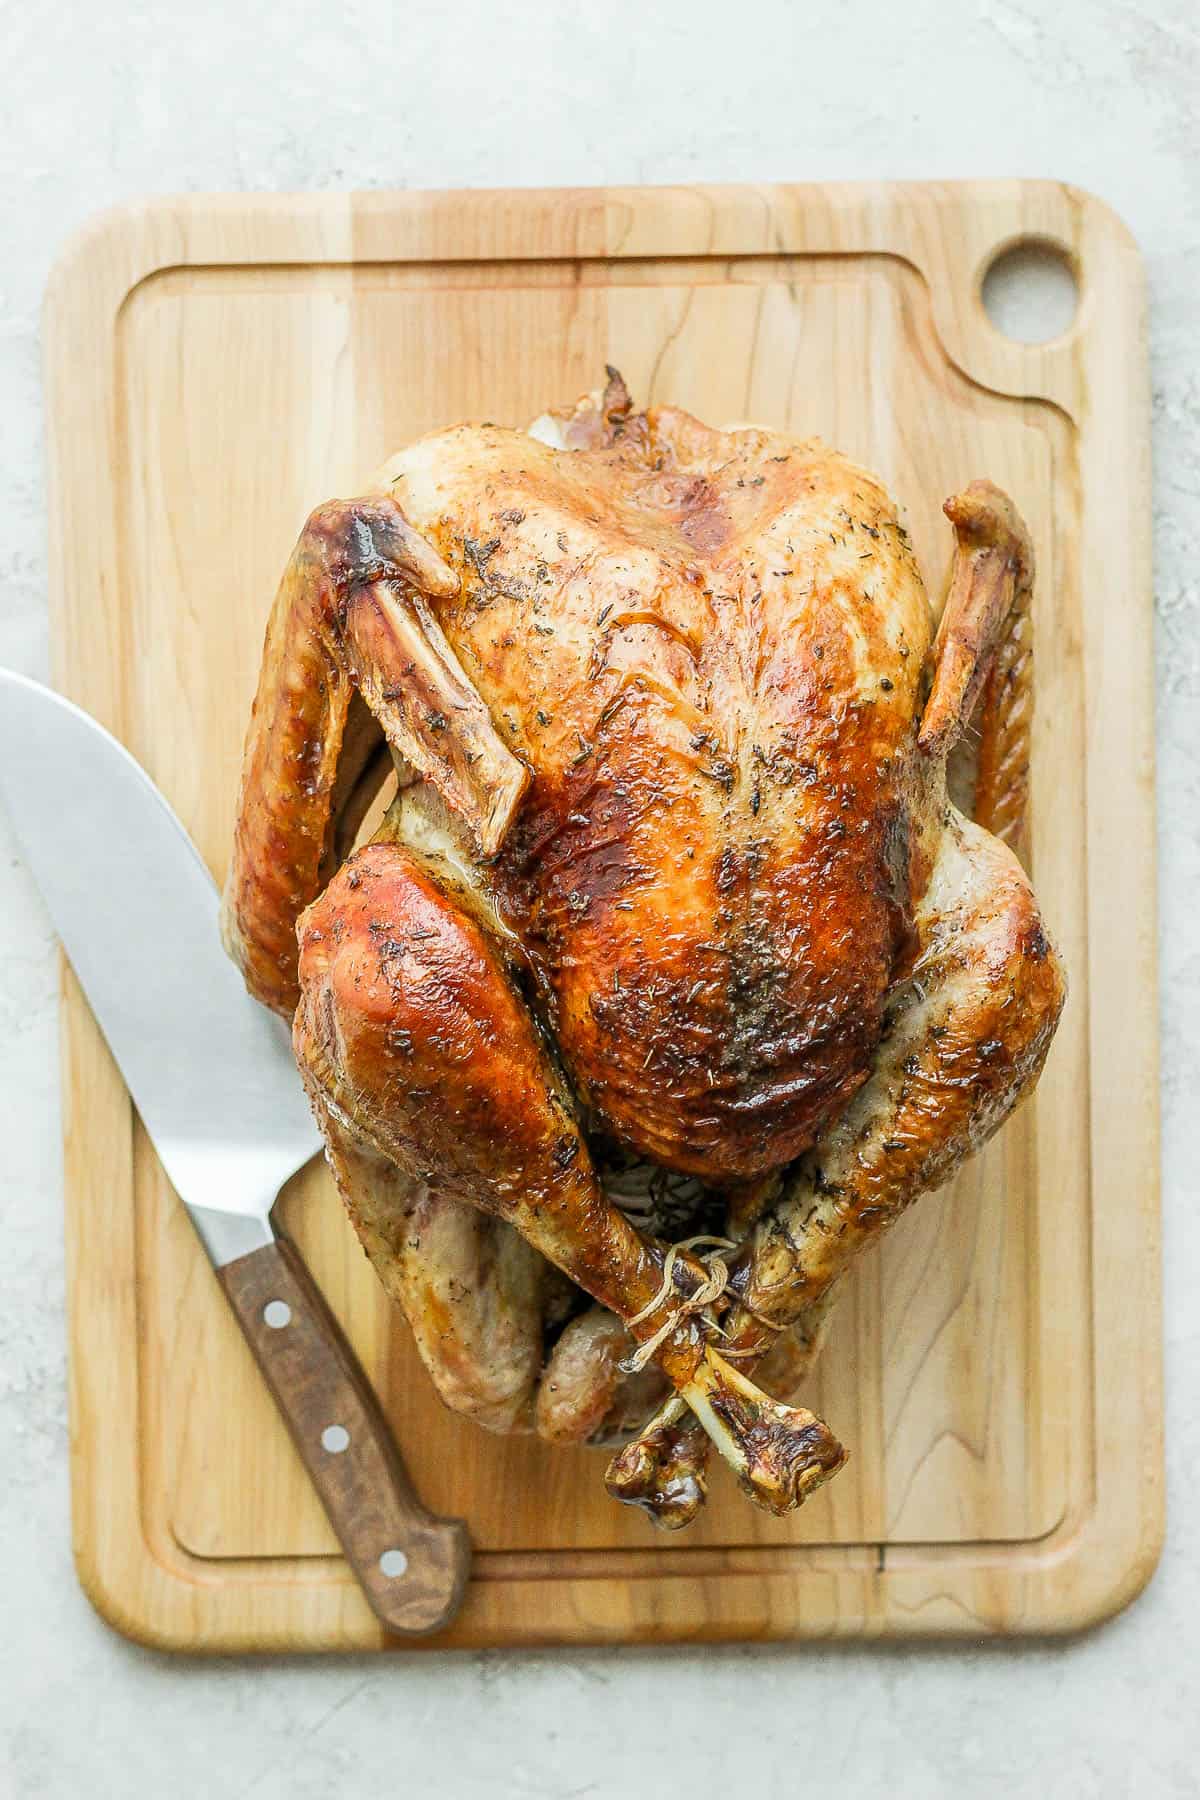 A fully cooked turkey resting on a cutting board.